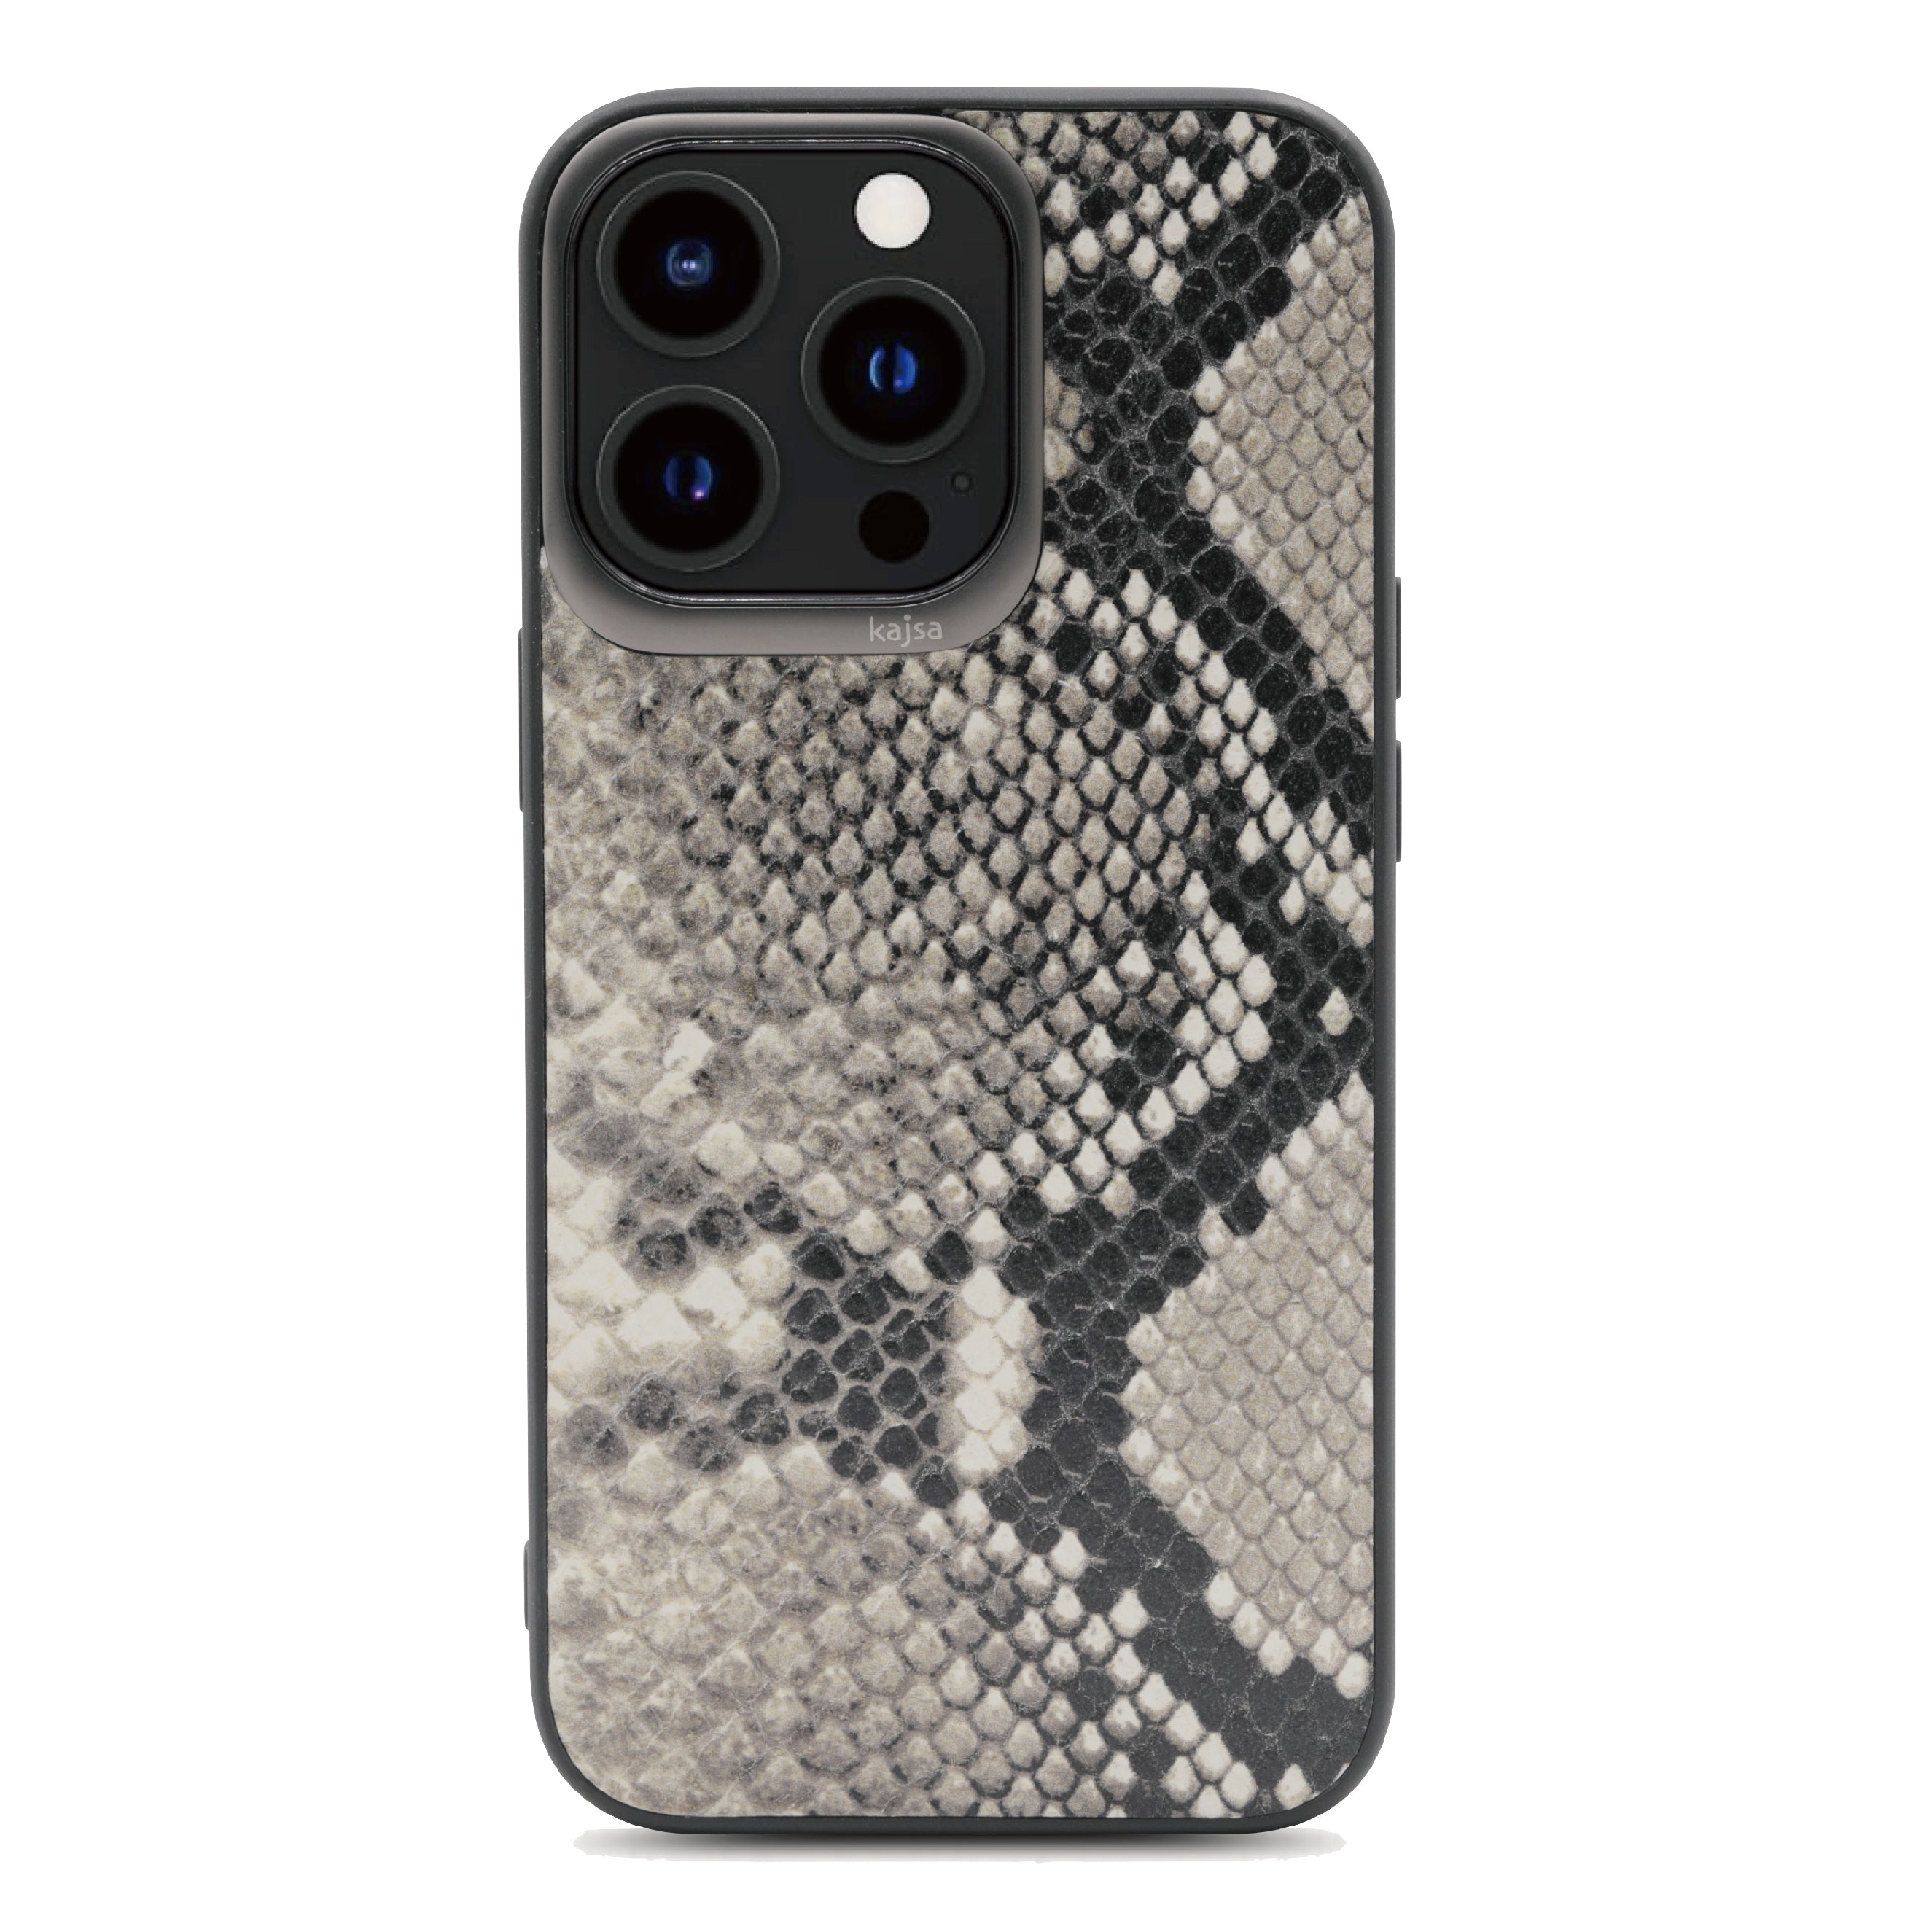 Glamorous Collection - Genuine Leather Snake Pattern Back Case for iPhone 13-Phone Case- phone case - phone cases- phone cover- iphone cover- iphone case- iphone cases- leather case- leather cases- DIYCASE - custom case - leather cover - hand strap case - croco pattern case - snake pattern case - carbon fiber phone case - phone case brand - unique phone case - high quality - phone case brand - protective case - buy phone case hong kong - online buy phone case - iphone‎手機殼 - 客製化手機殼 - samsung ‎手機殼 - 香港手機殼 - 買